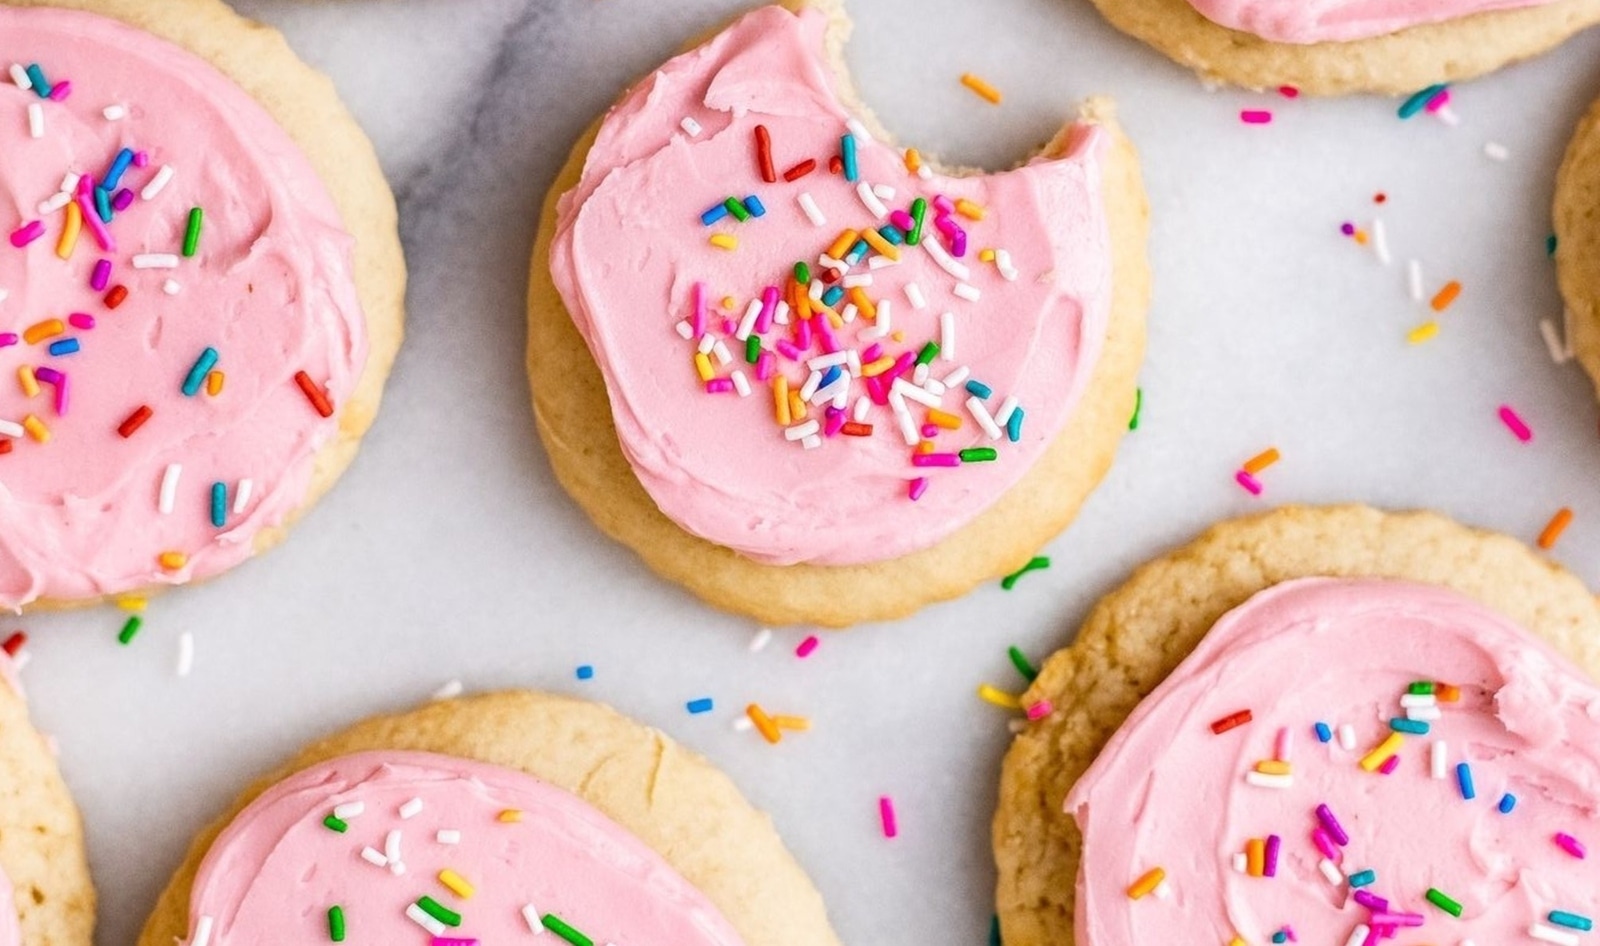 Are Sprinkles Vegan? Here's What You Need to Know About the Tiny Colorful Candies&nbsp;